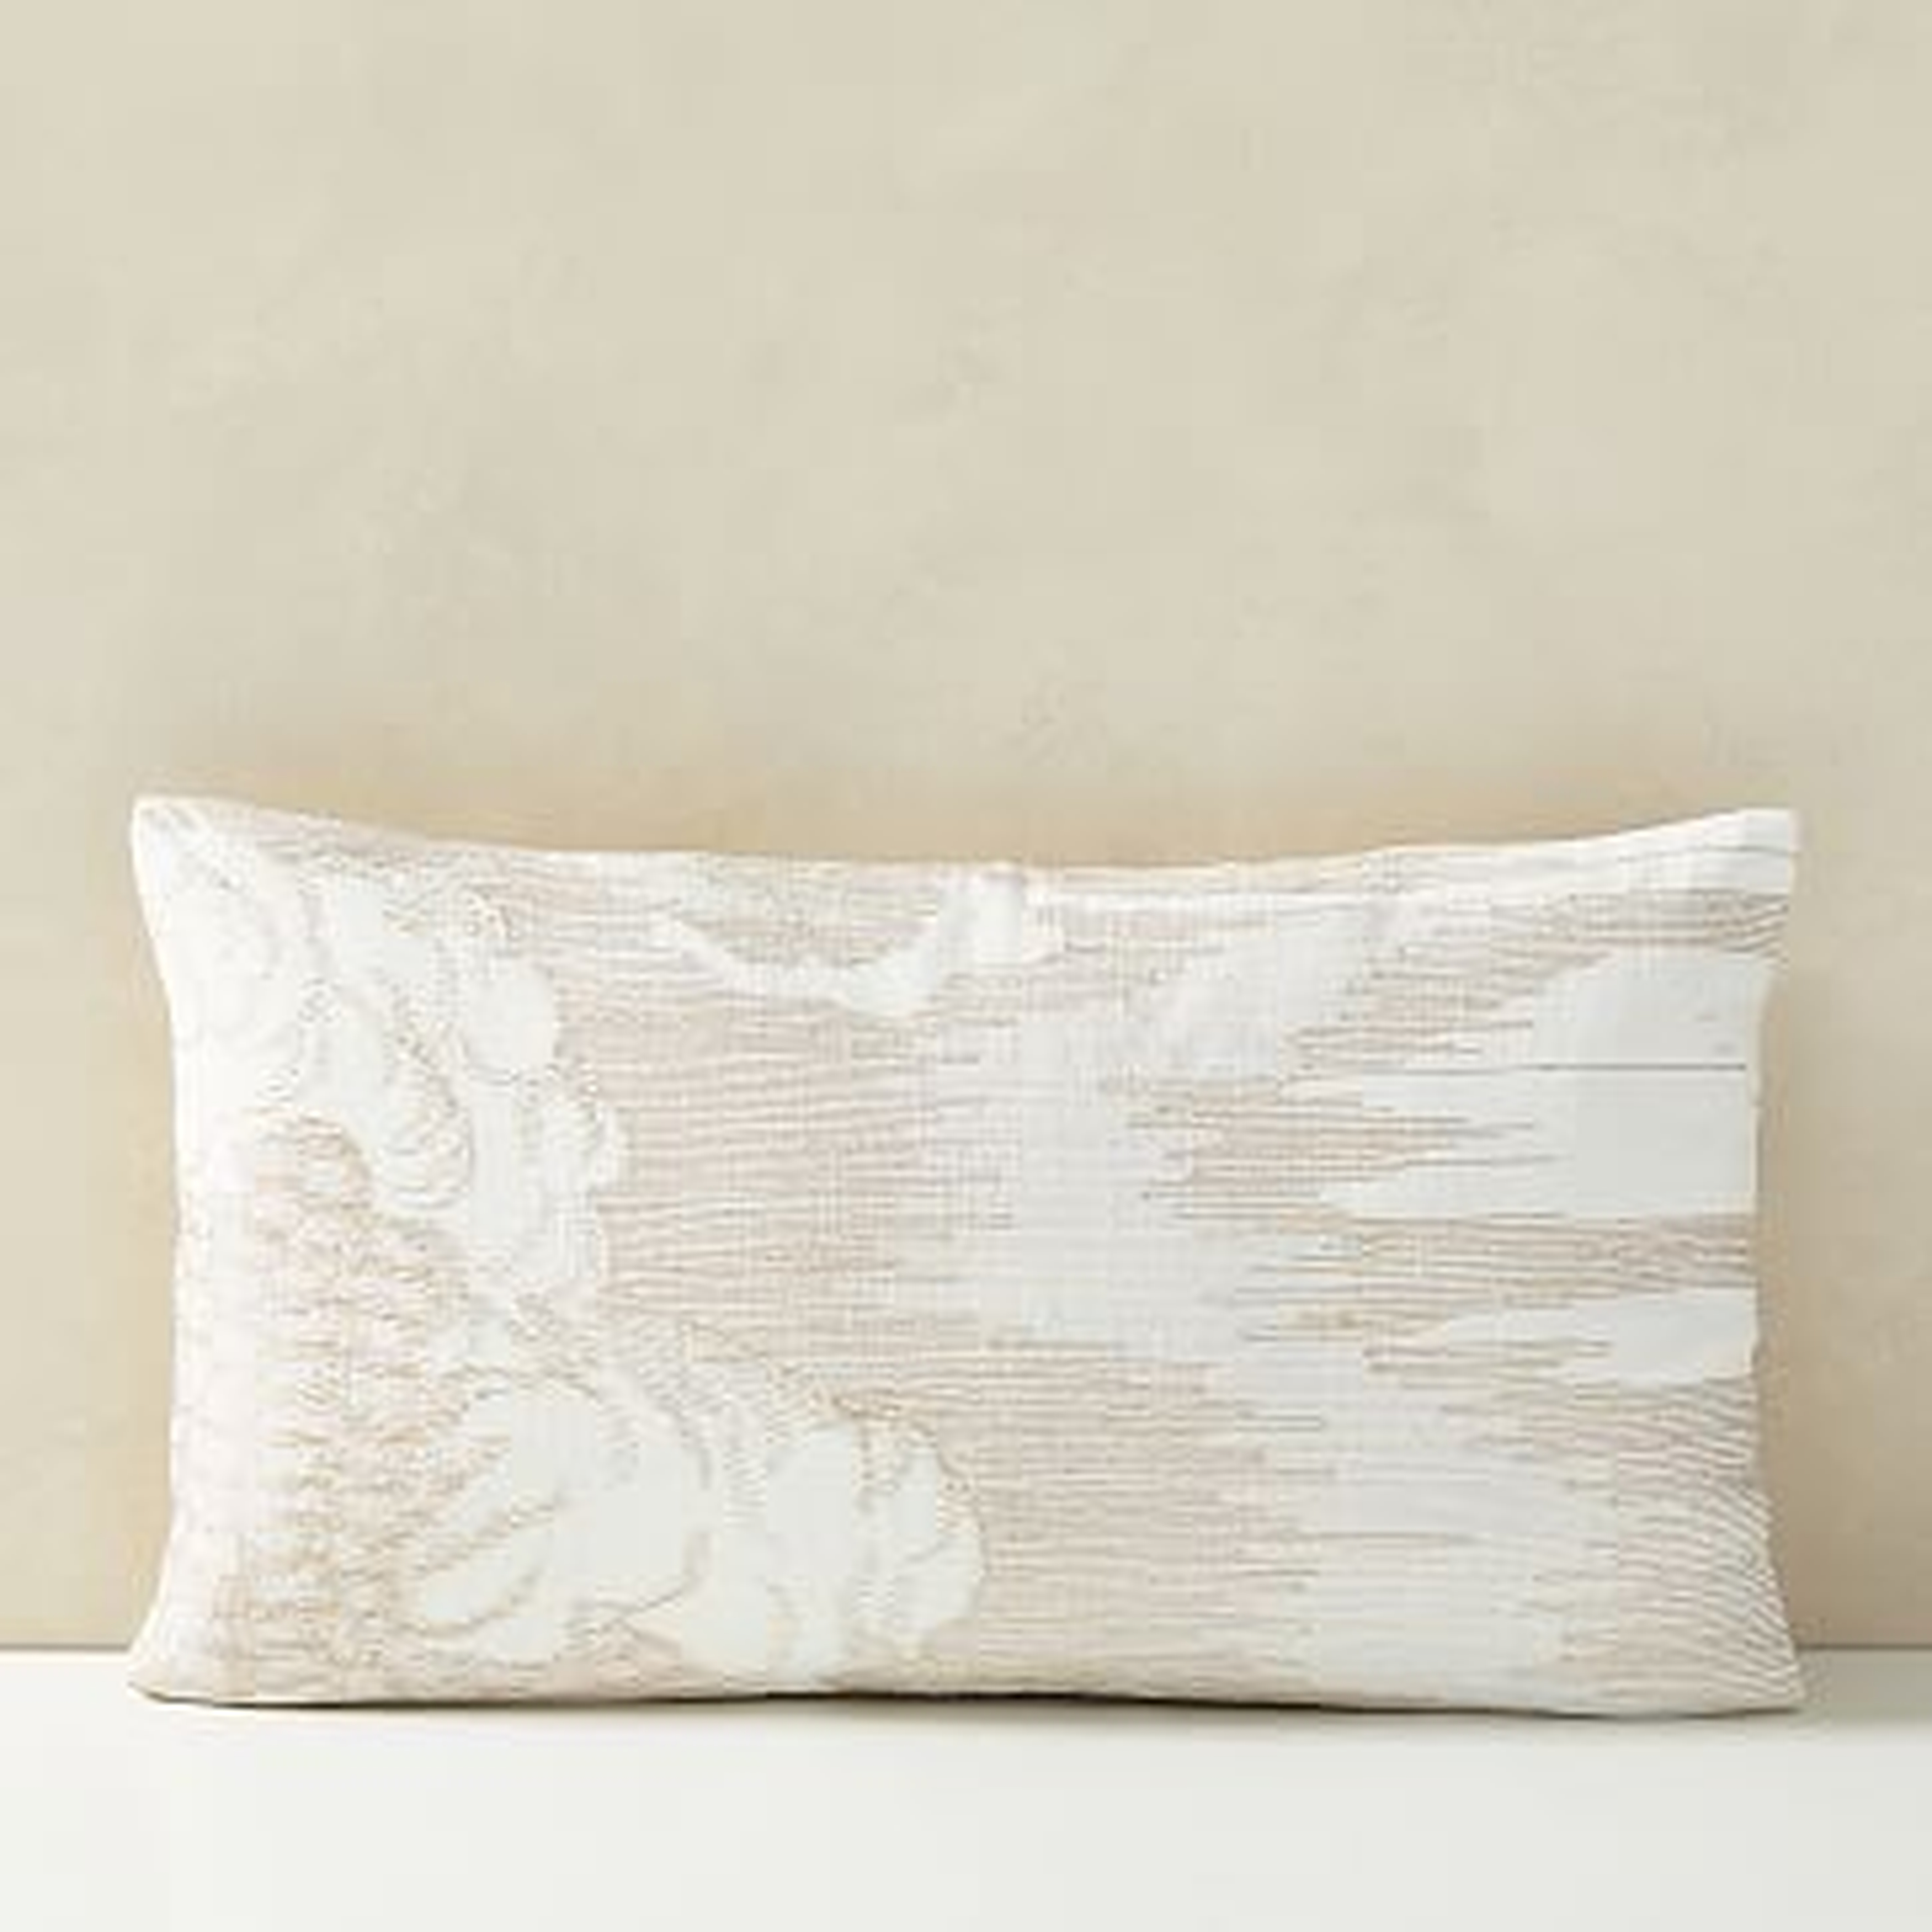 Embroidered Etched Clouds Pillow Cover, 12"x21", Belgian Flax - West Elm